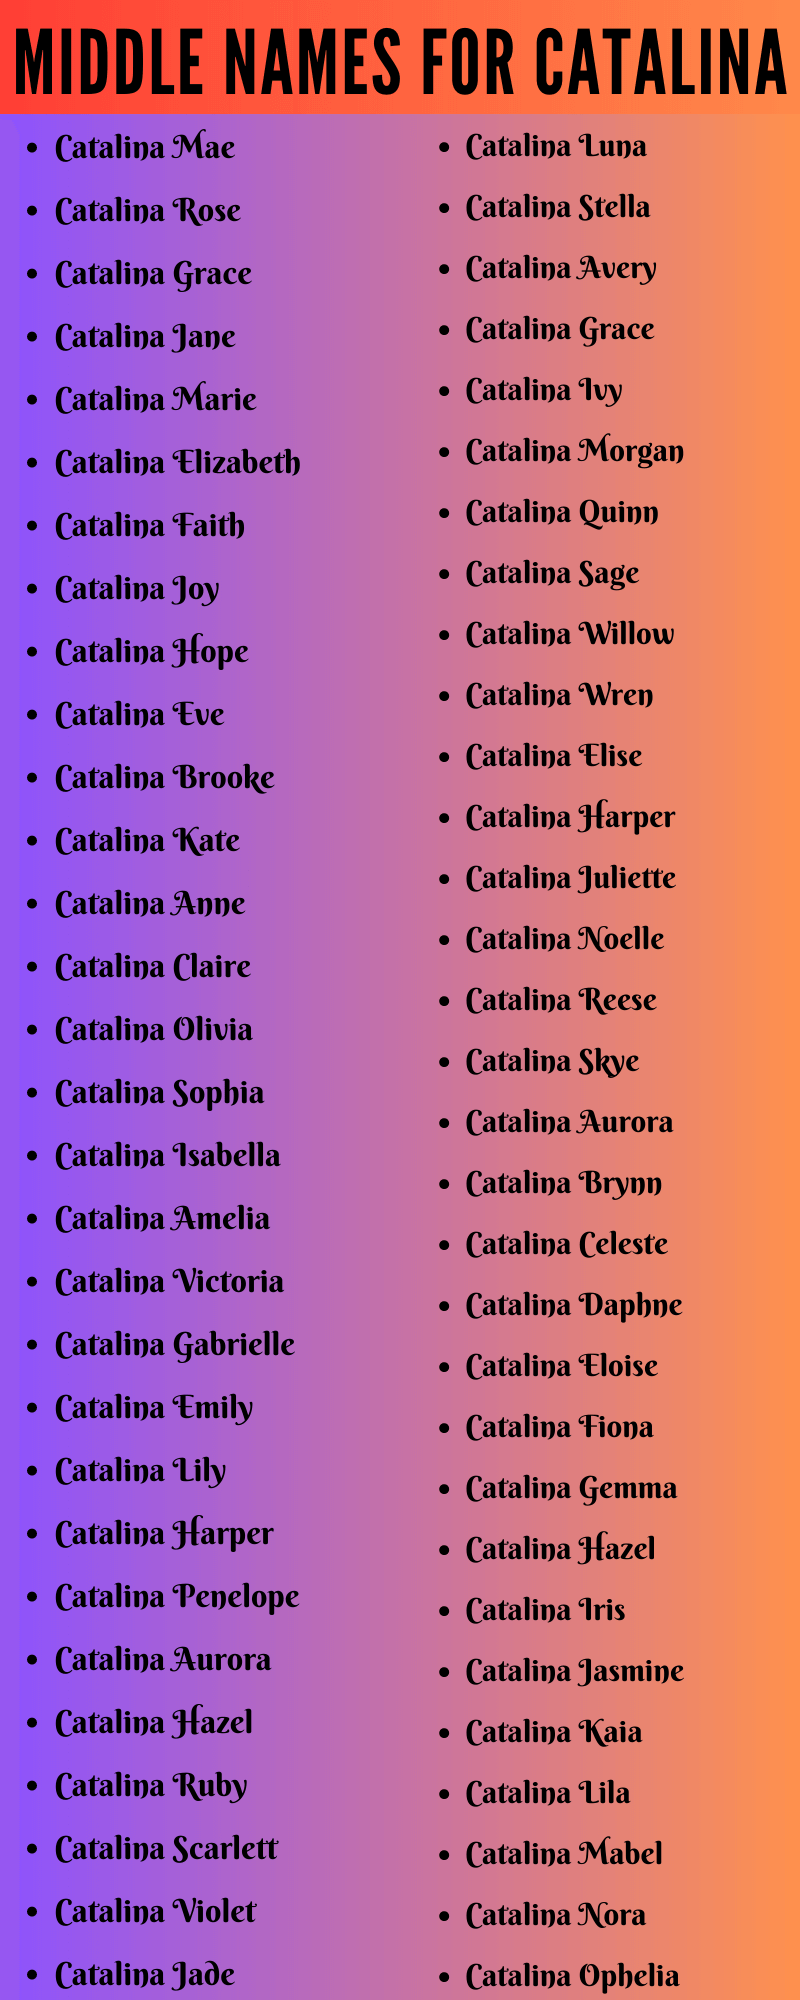 400 Best Middle Names For Catalina